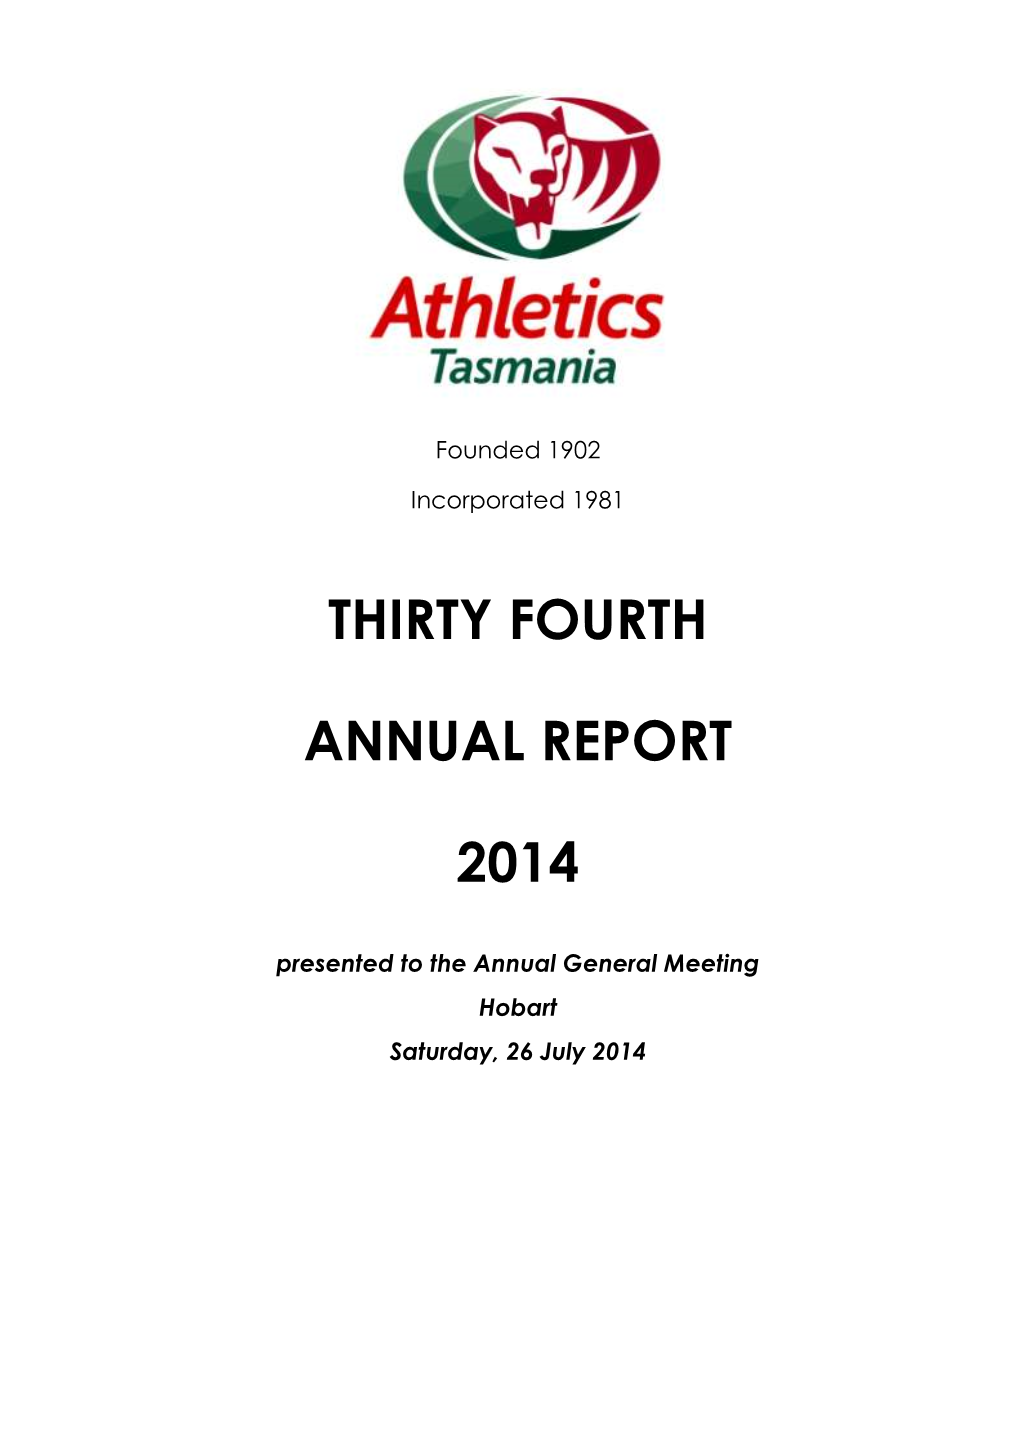 Athletics Tasmania Acknowledges the Ongoing Efforts and Commitment Made by Its Officials, Coaches, Volunteers and Administrators